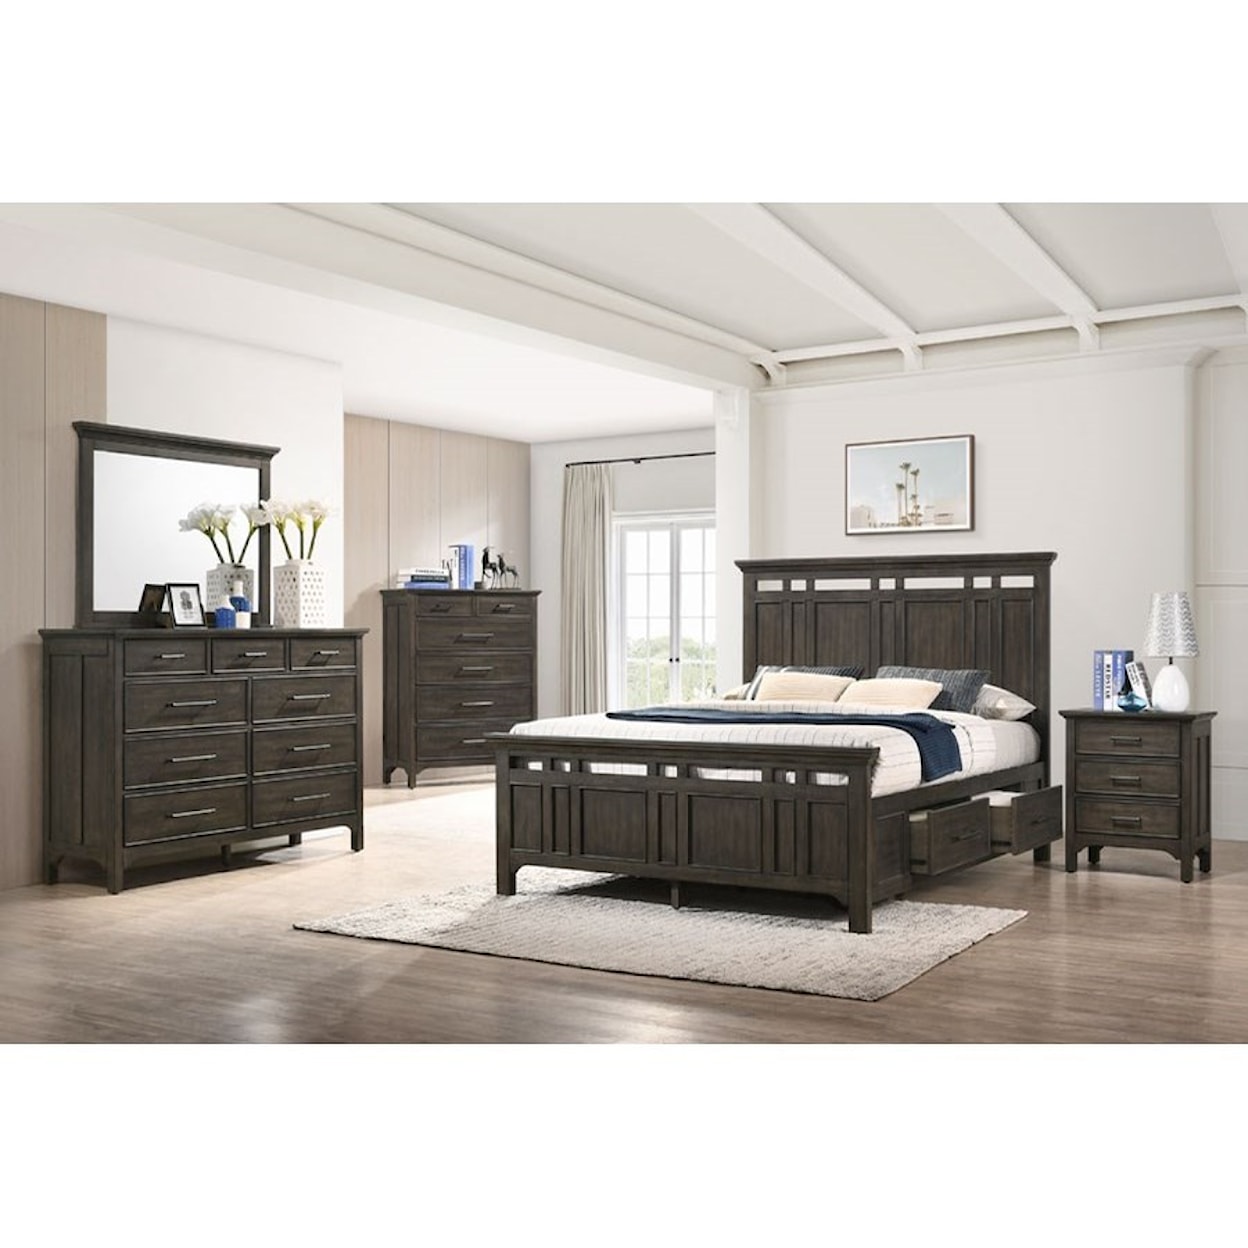 Intercon Hawthorne INCHW/KSKIT Contemporary King Panel Bed with Storage ...